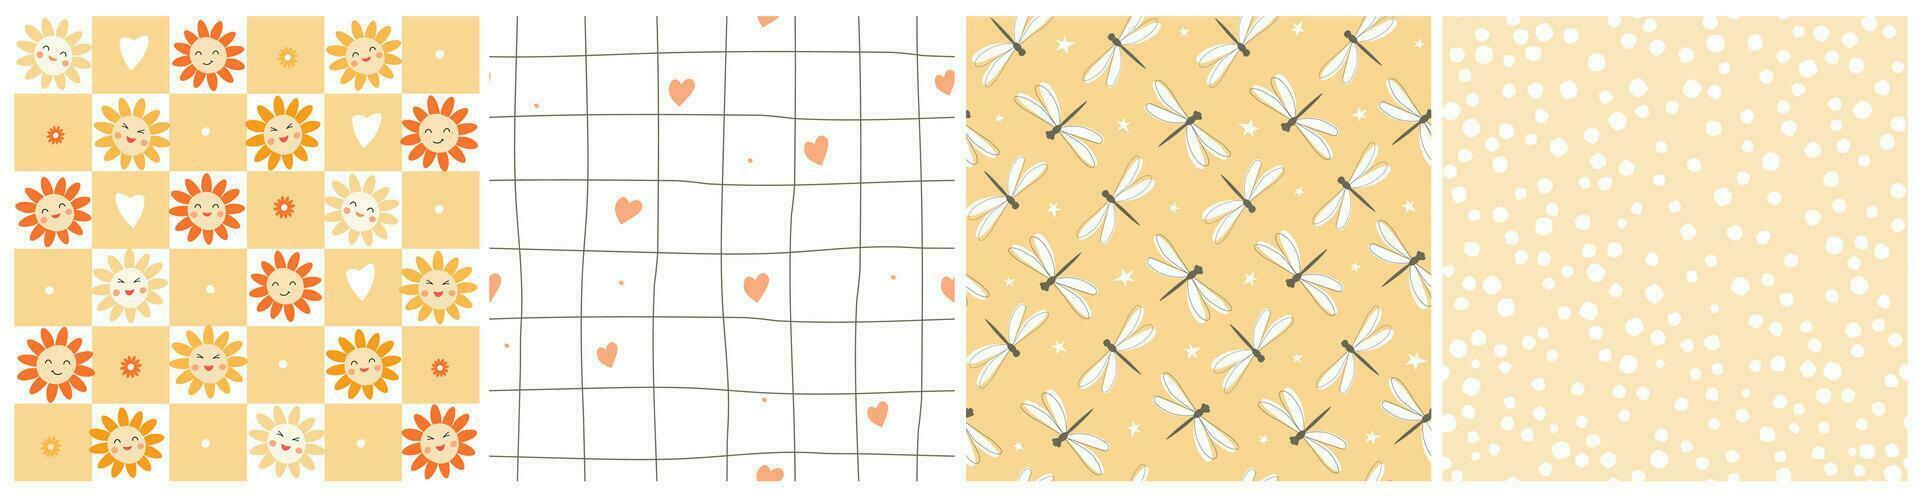 A set of seamless patterns with abstract drawings on the background of cells, grids, squares. Summer simple prints with flowers, dragonflies, hearts, dots. Vector graphics.